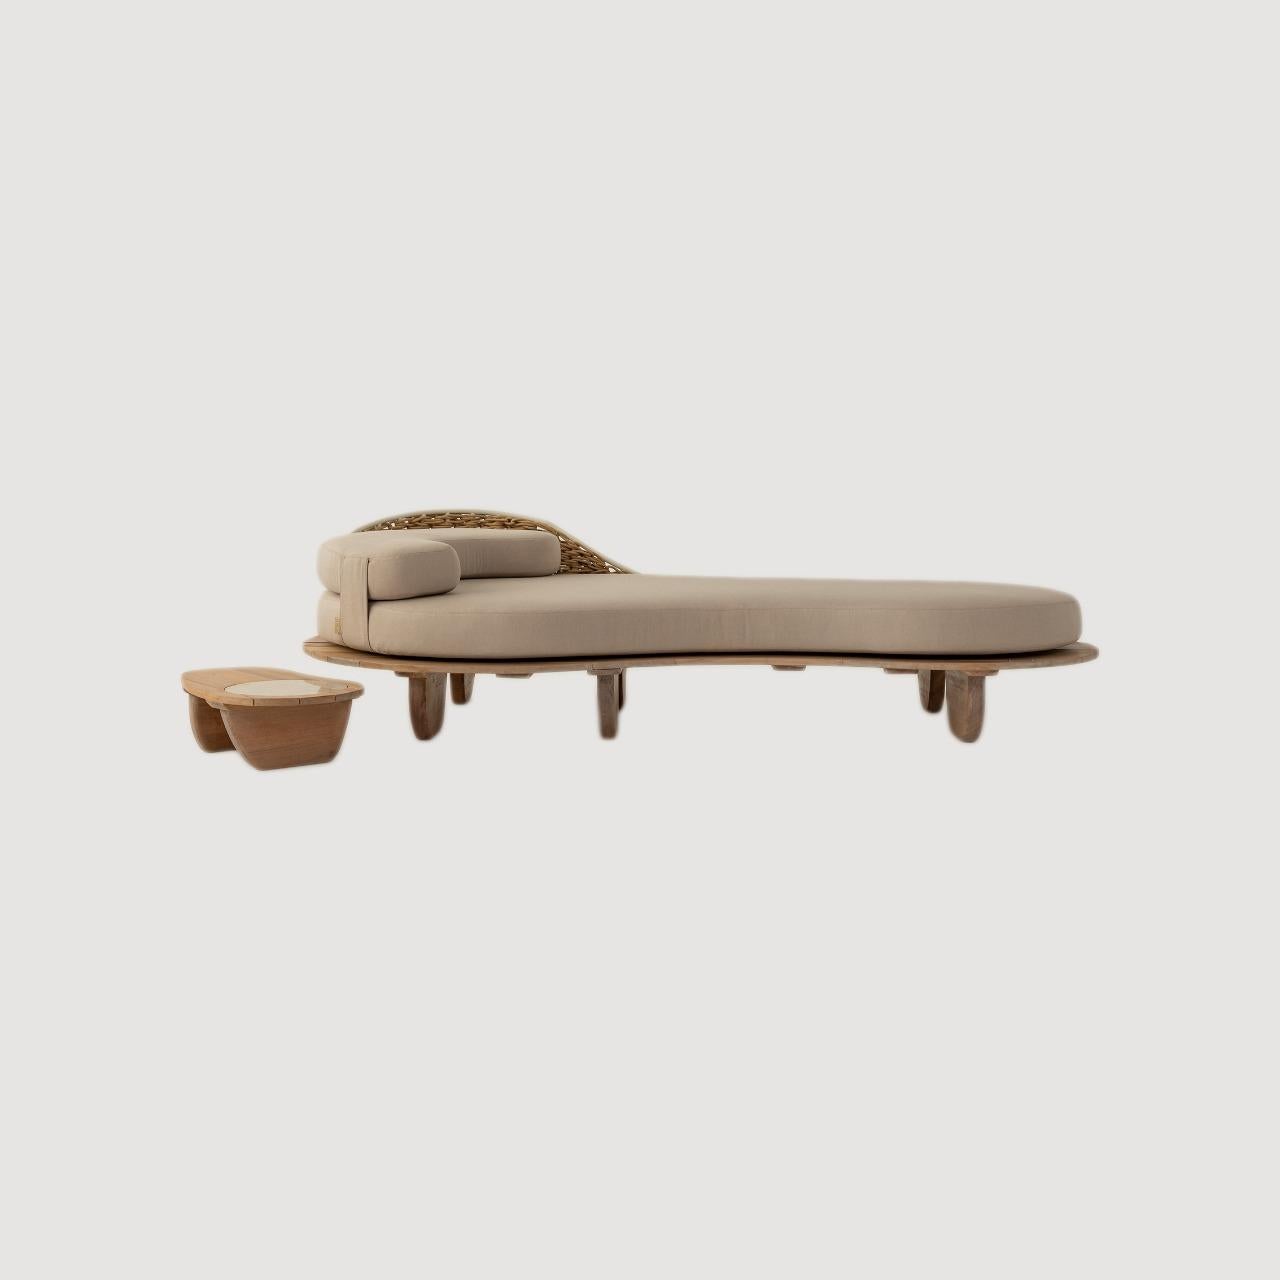 Wood The Sayari Indoor / Outdoor Daybed Chaise Collection by Studio Lloyd For Sale